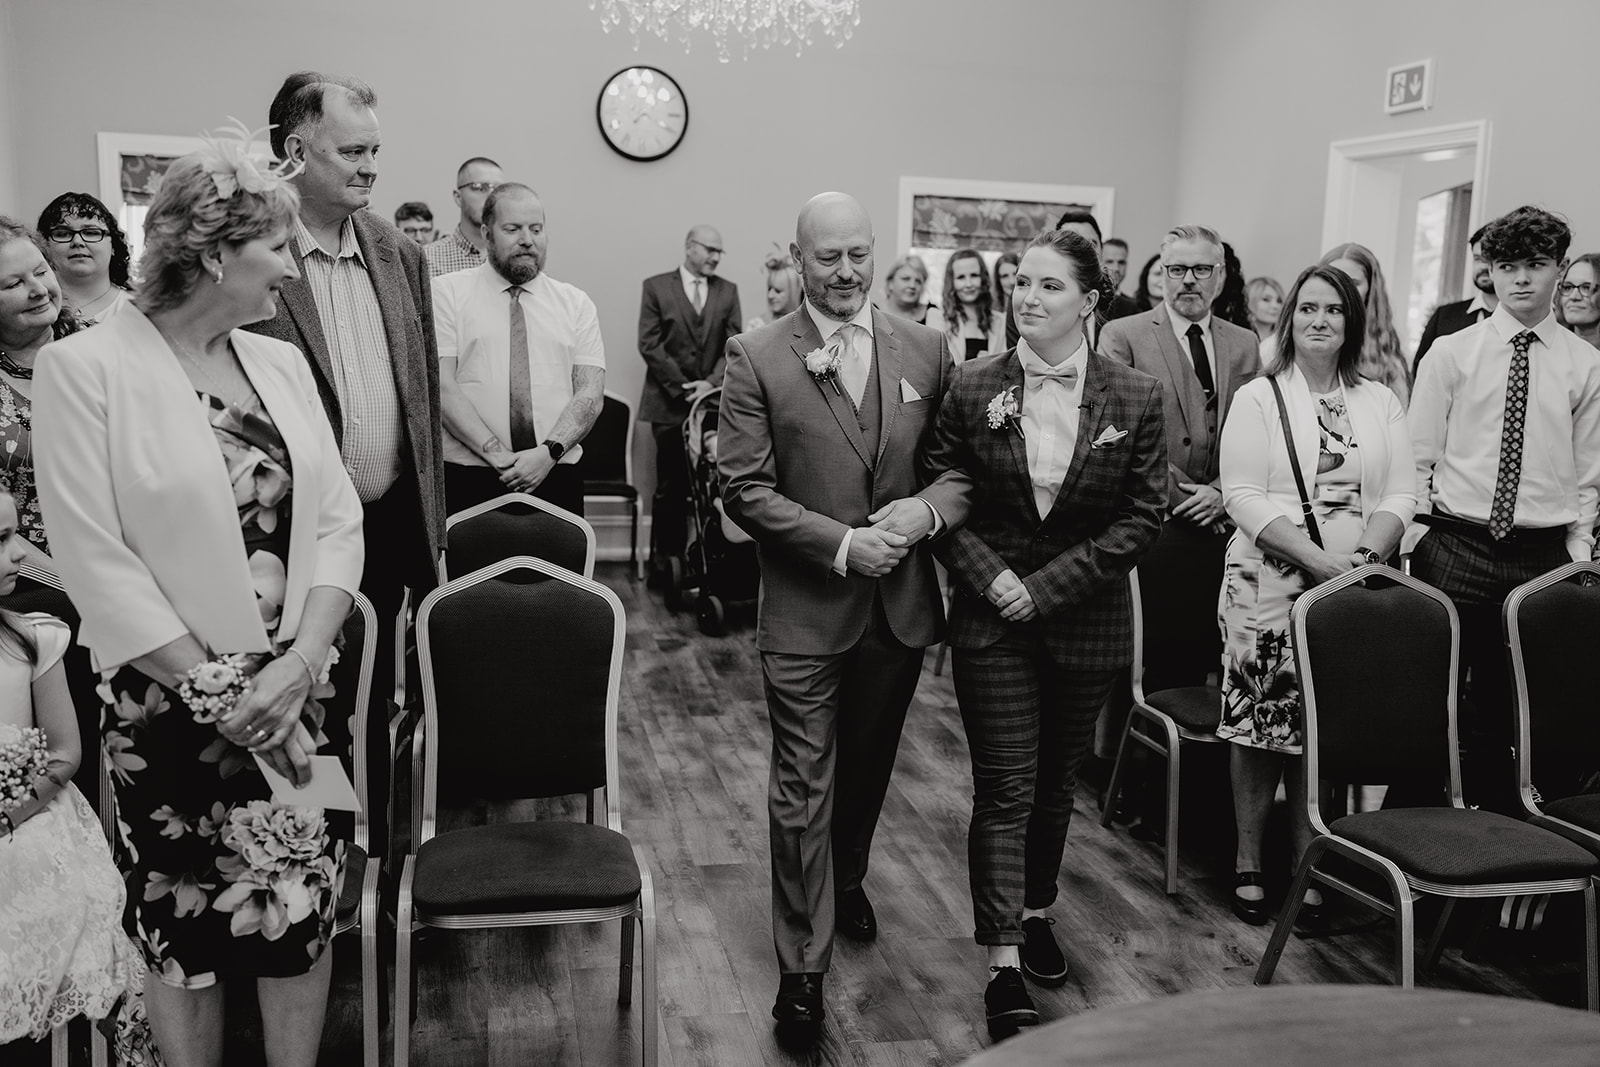 The Brewhouse & Kitchen Wedding Photography - the bride and her dad walking down the wedding aisle